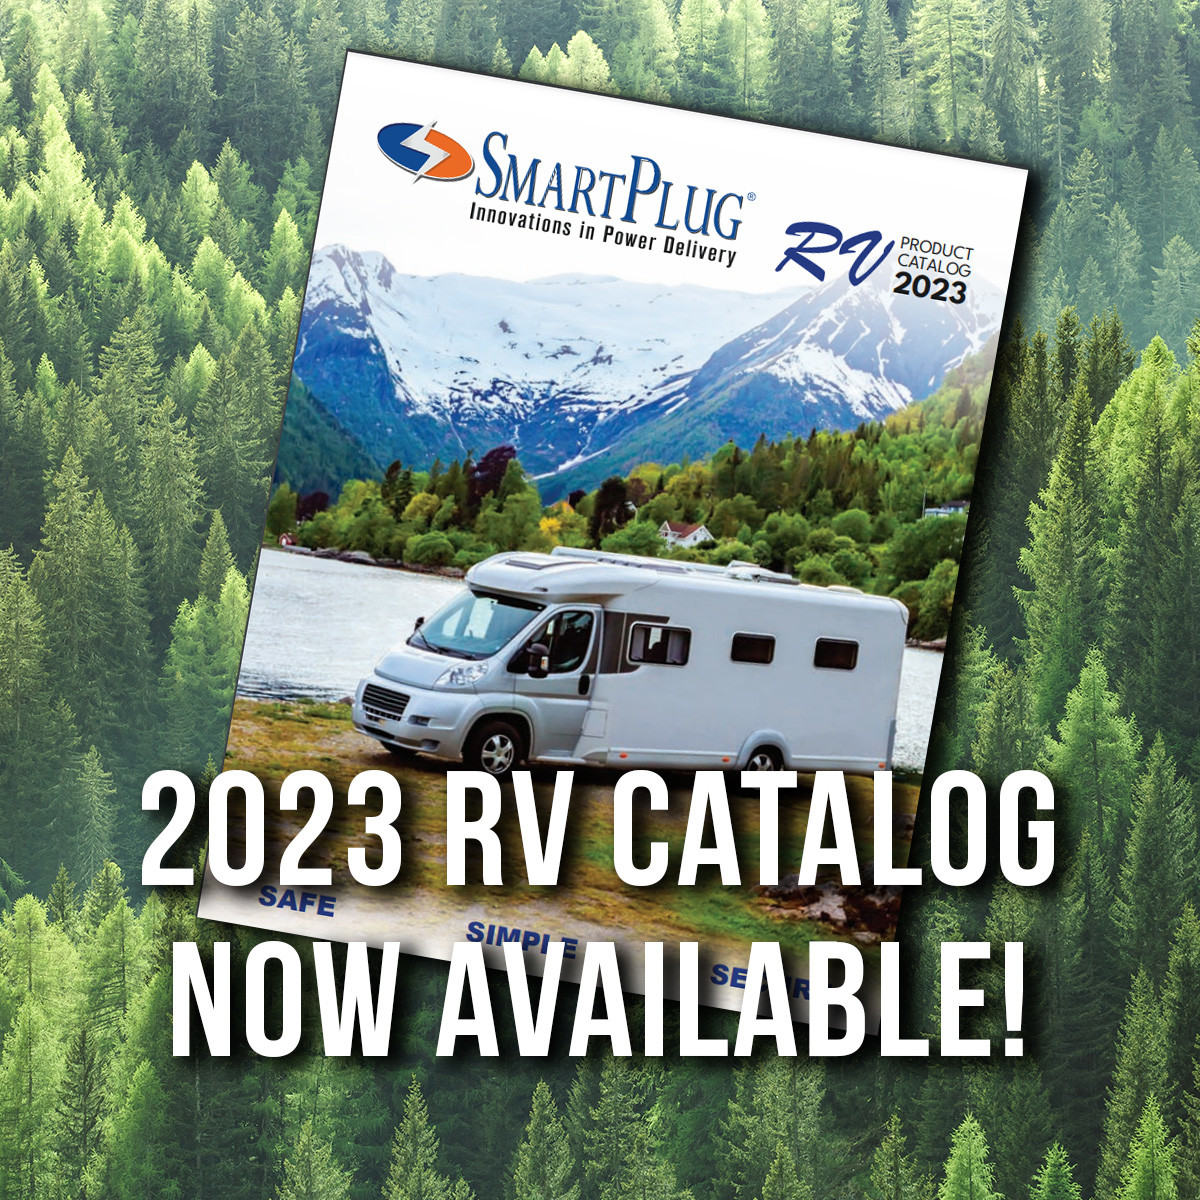 Our 2023 #SmartPlug RV Catalog has the latest products and innovations for RV enthusiasts. 

NOW AVAILABLE FOR DOWNLOAD HERE: rpb.li/e90K

#SmartPlugTechnology #ShorePowerSystem #RVSafety #RVAccessories